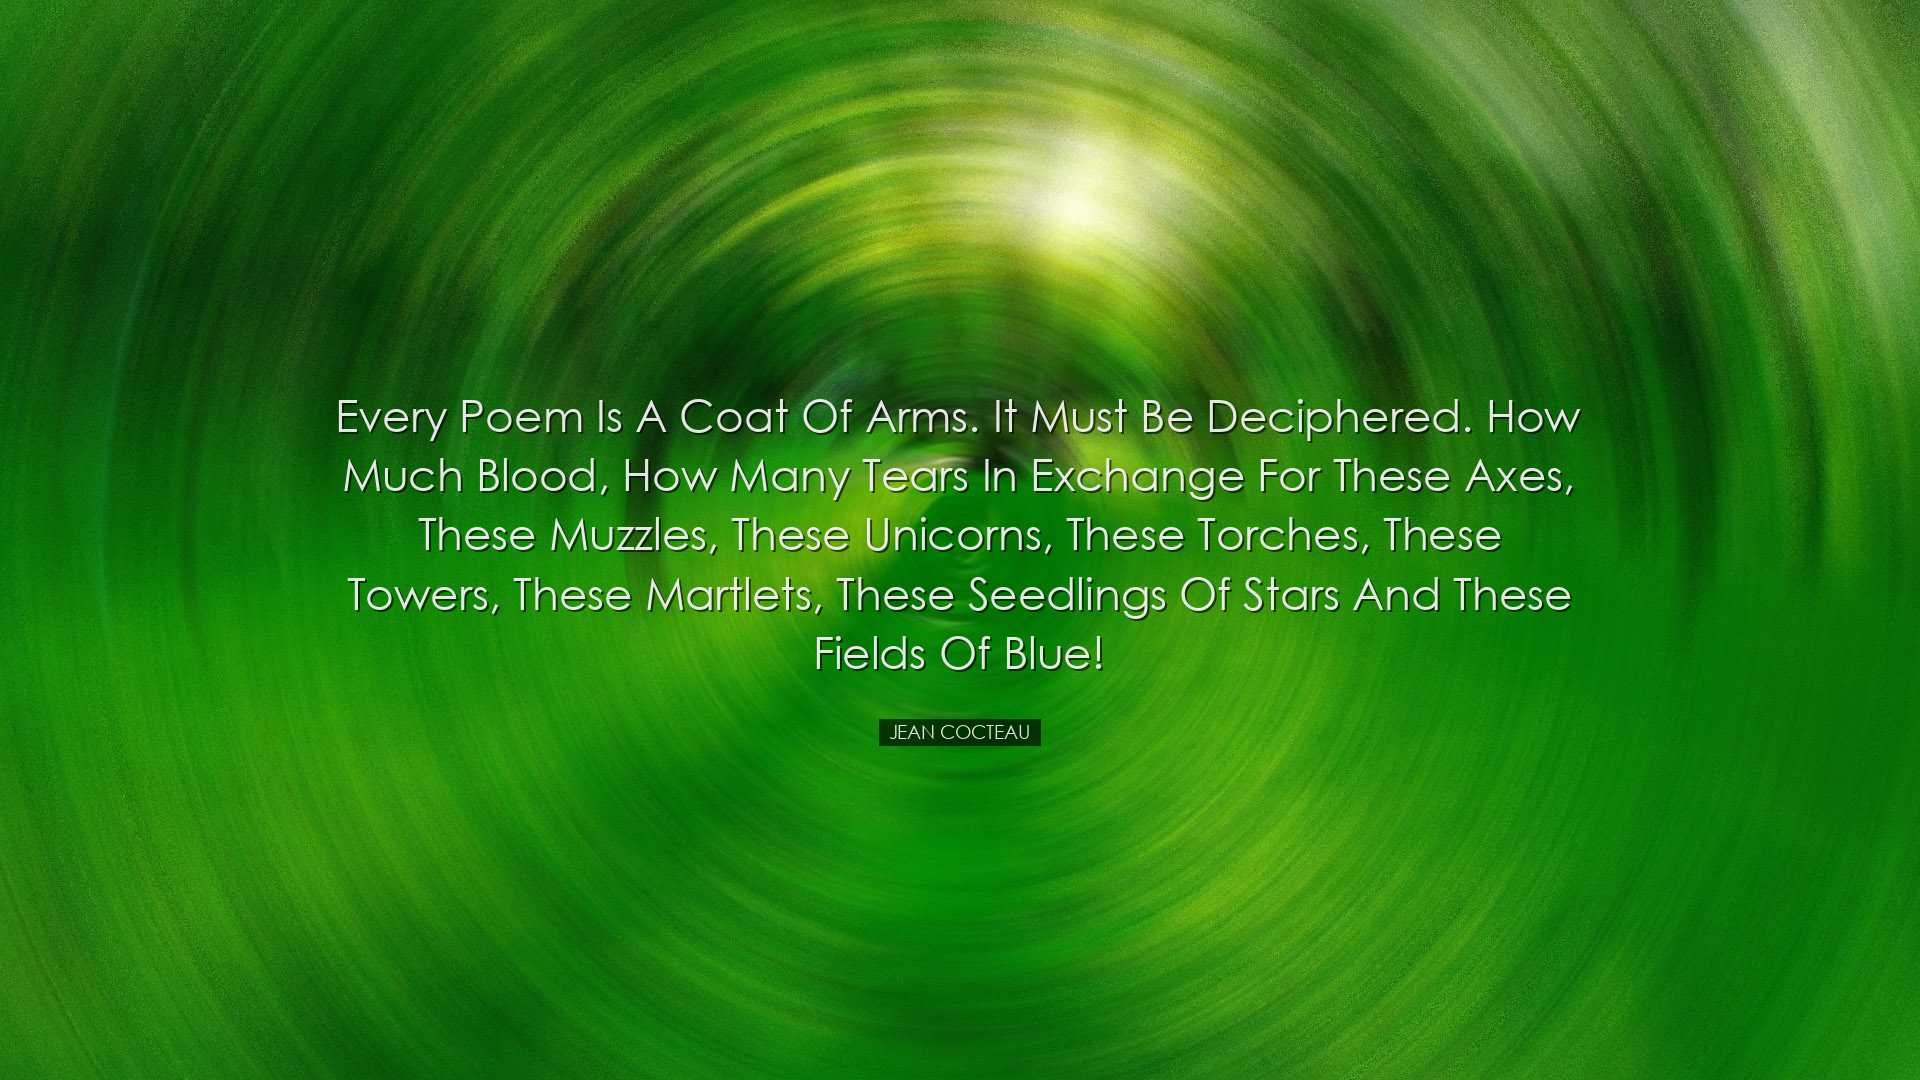 Every poem is a coat of arms. It must be deciphered. How much bloo